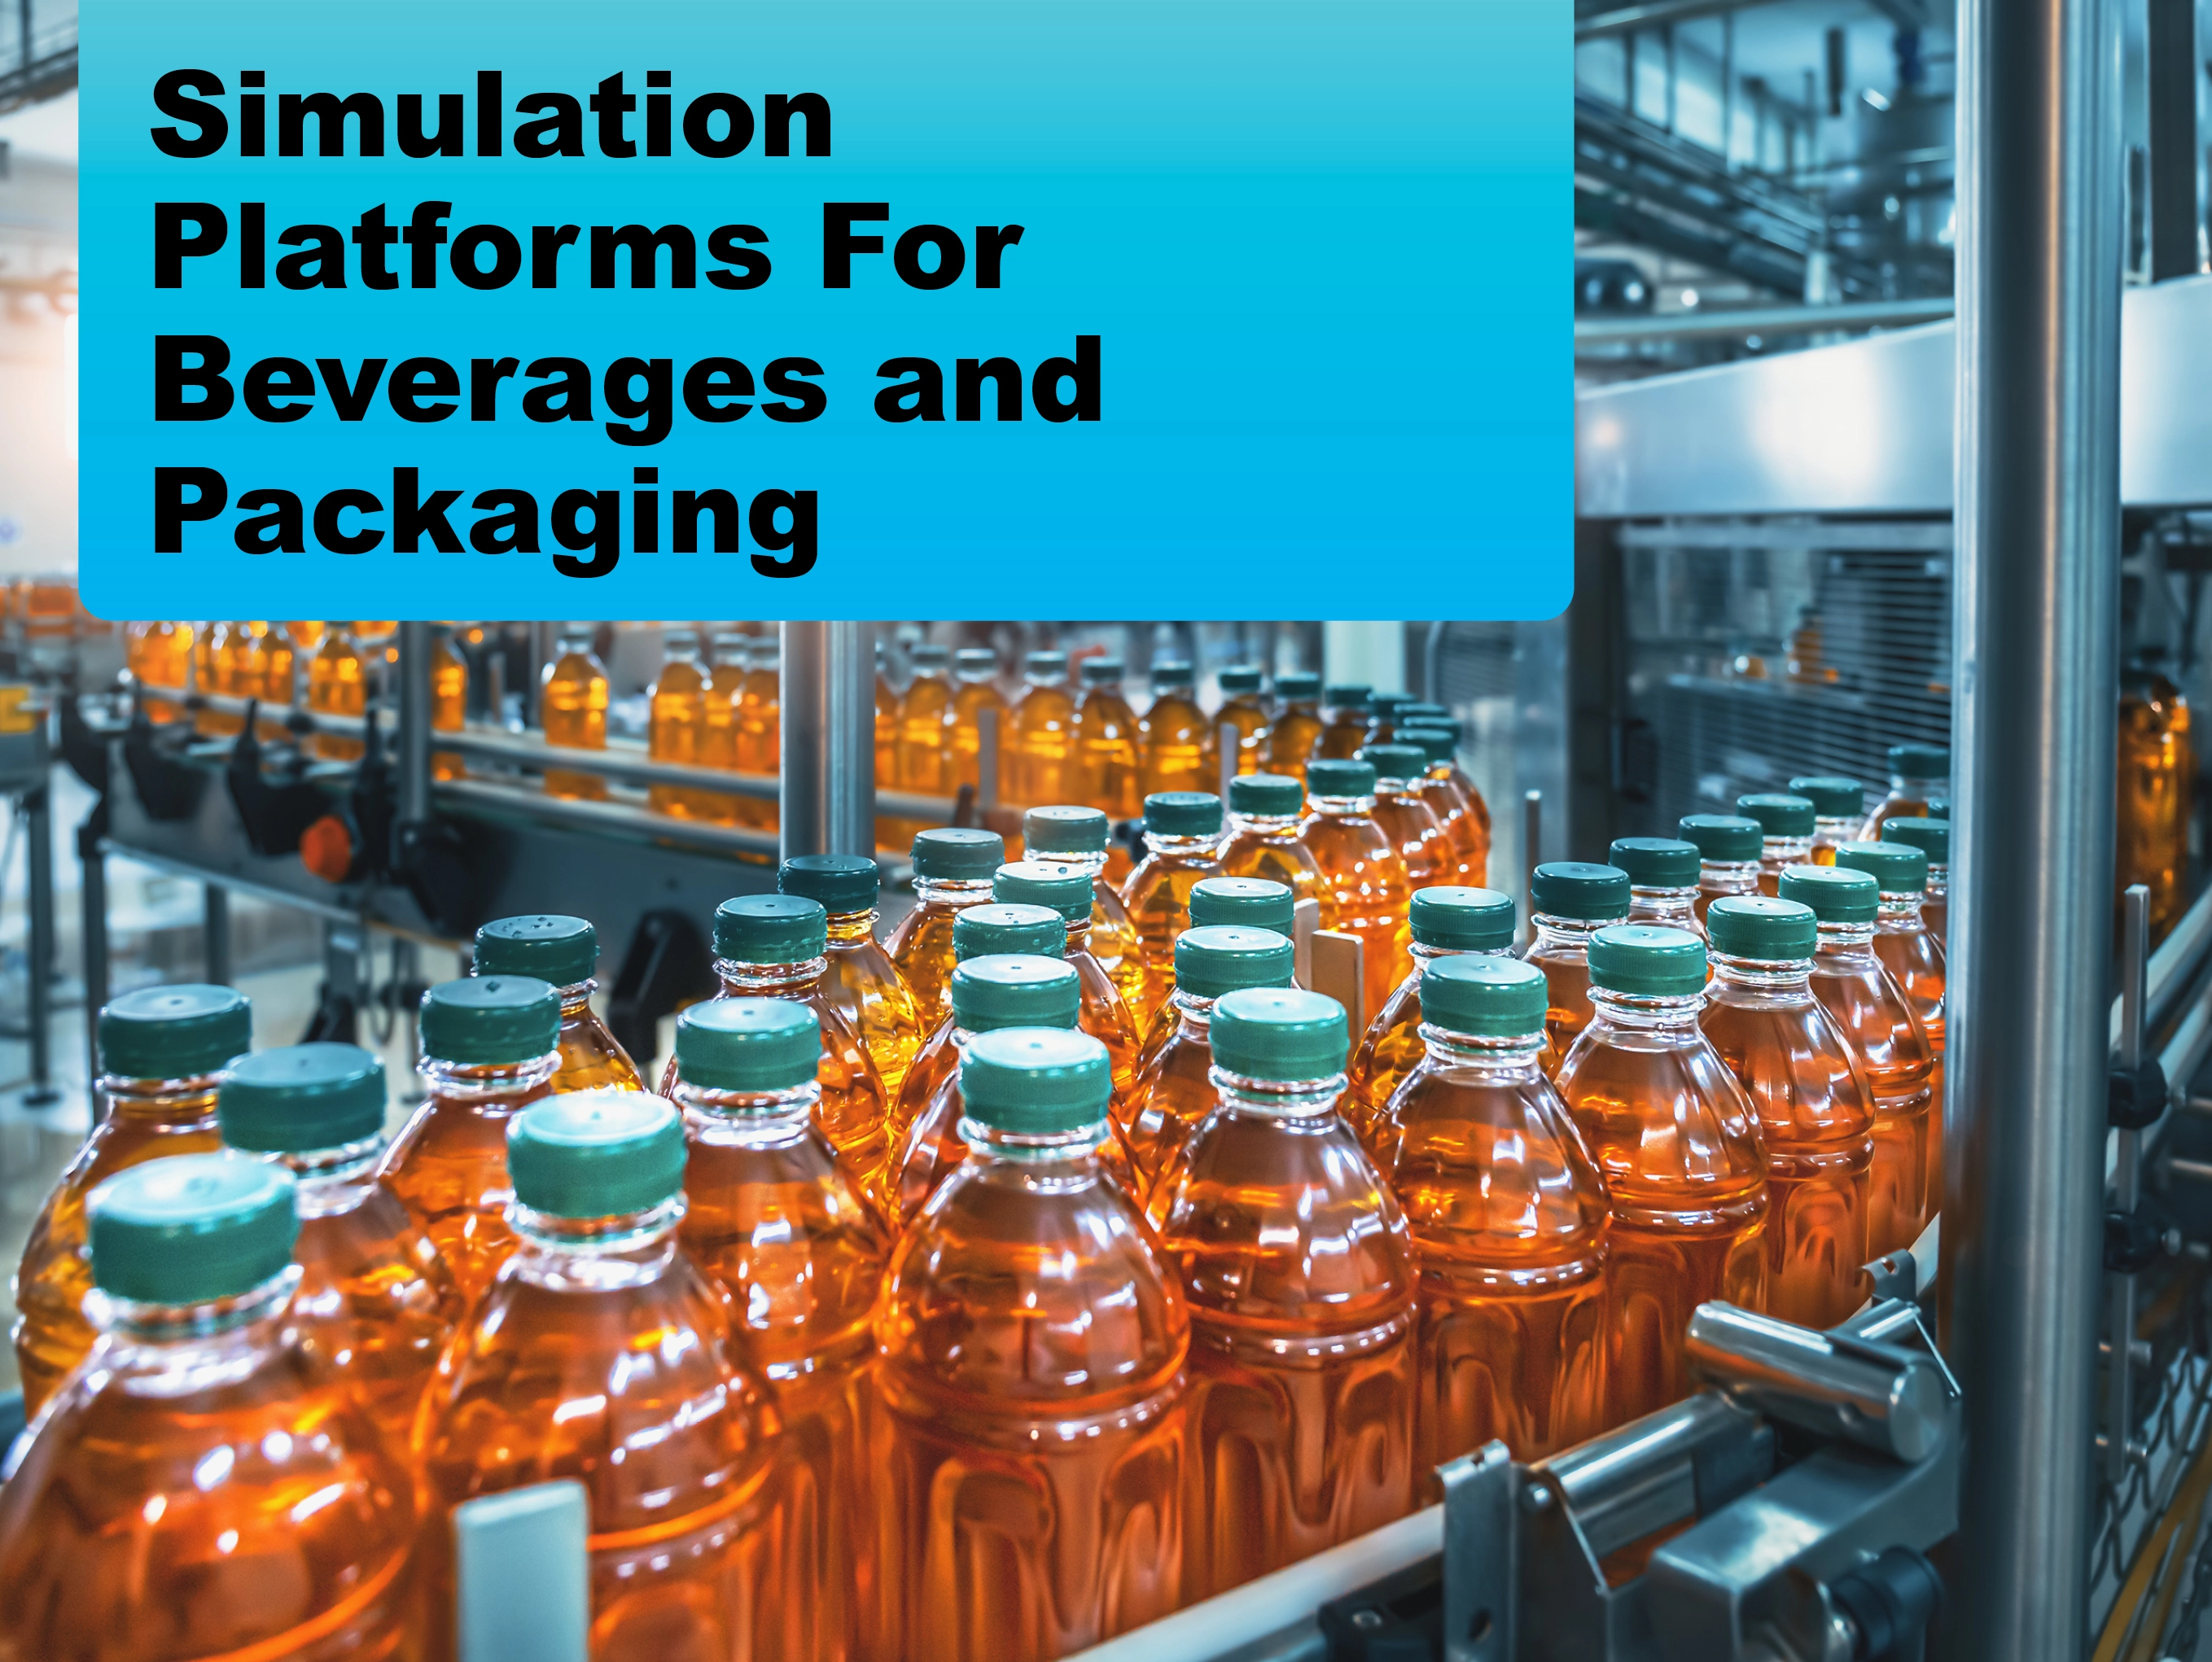 Simulation Platforms For Beverages and Packaging